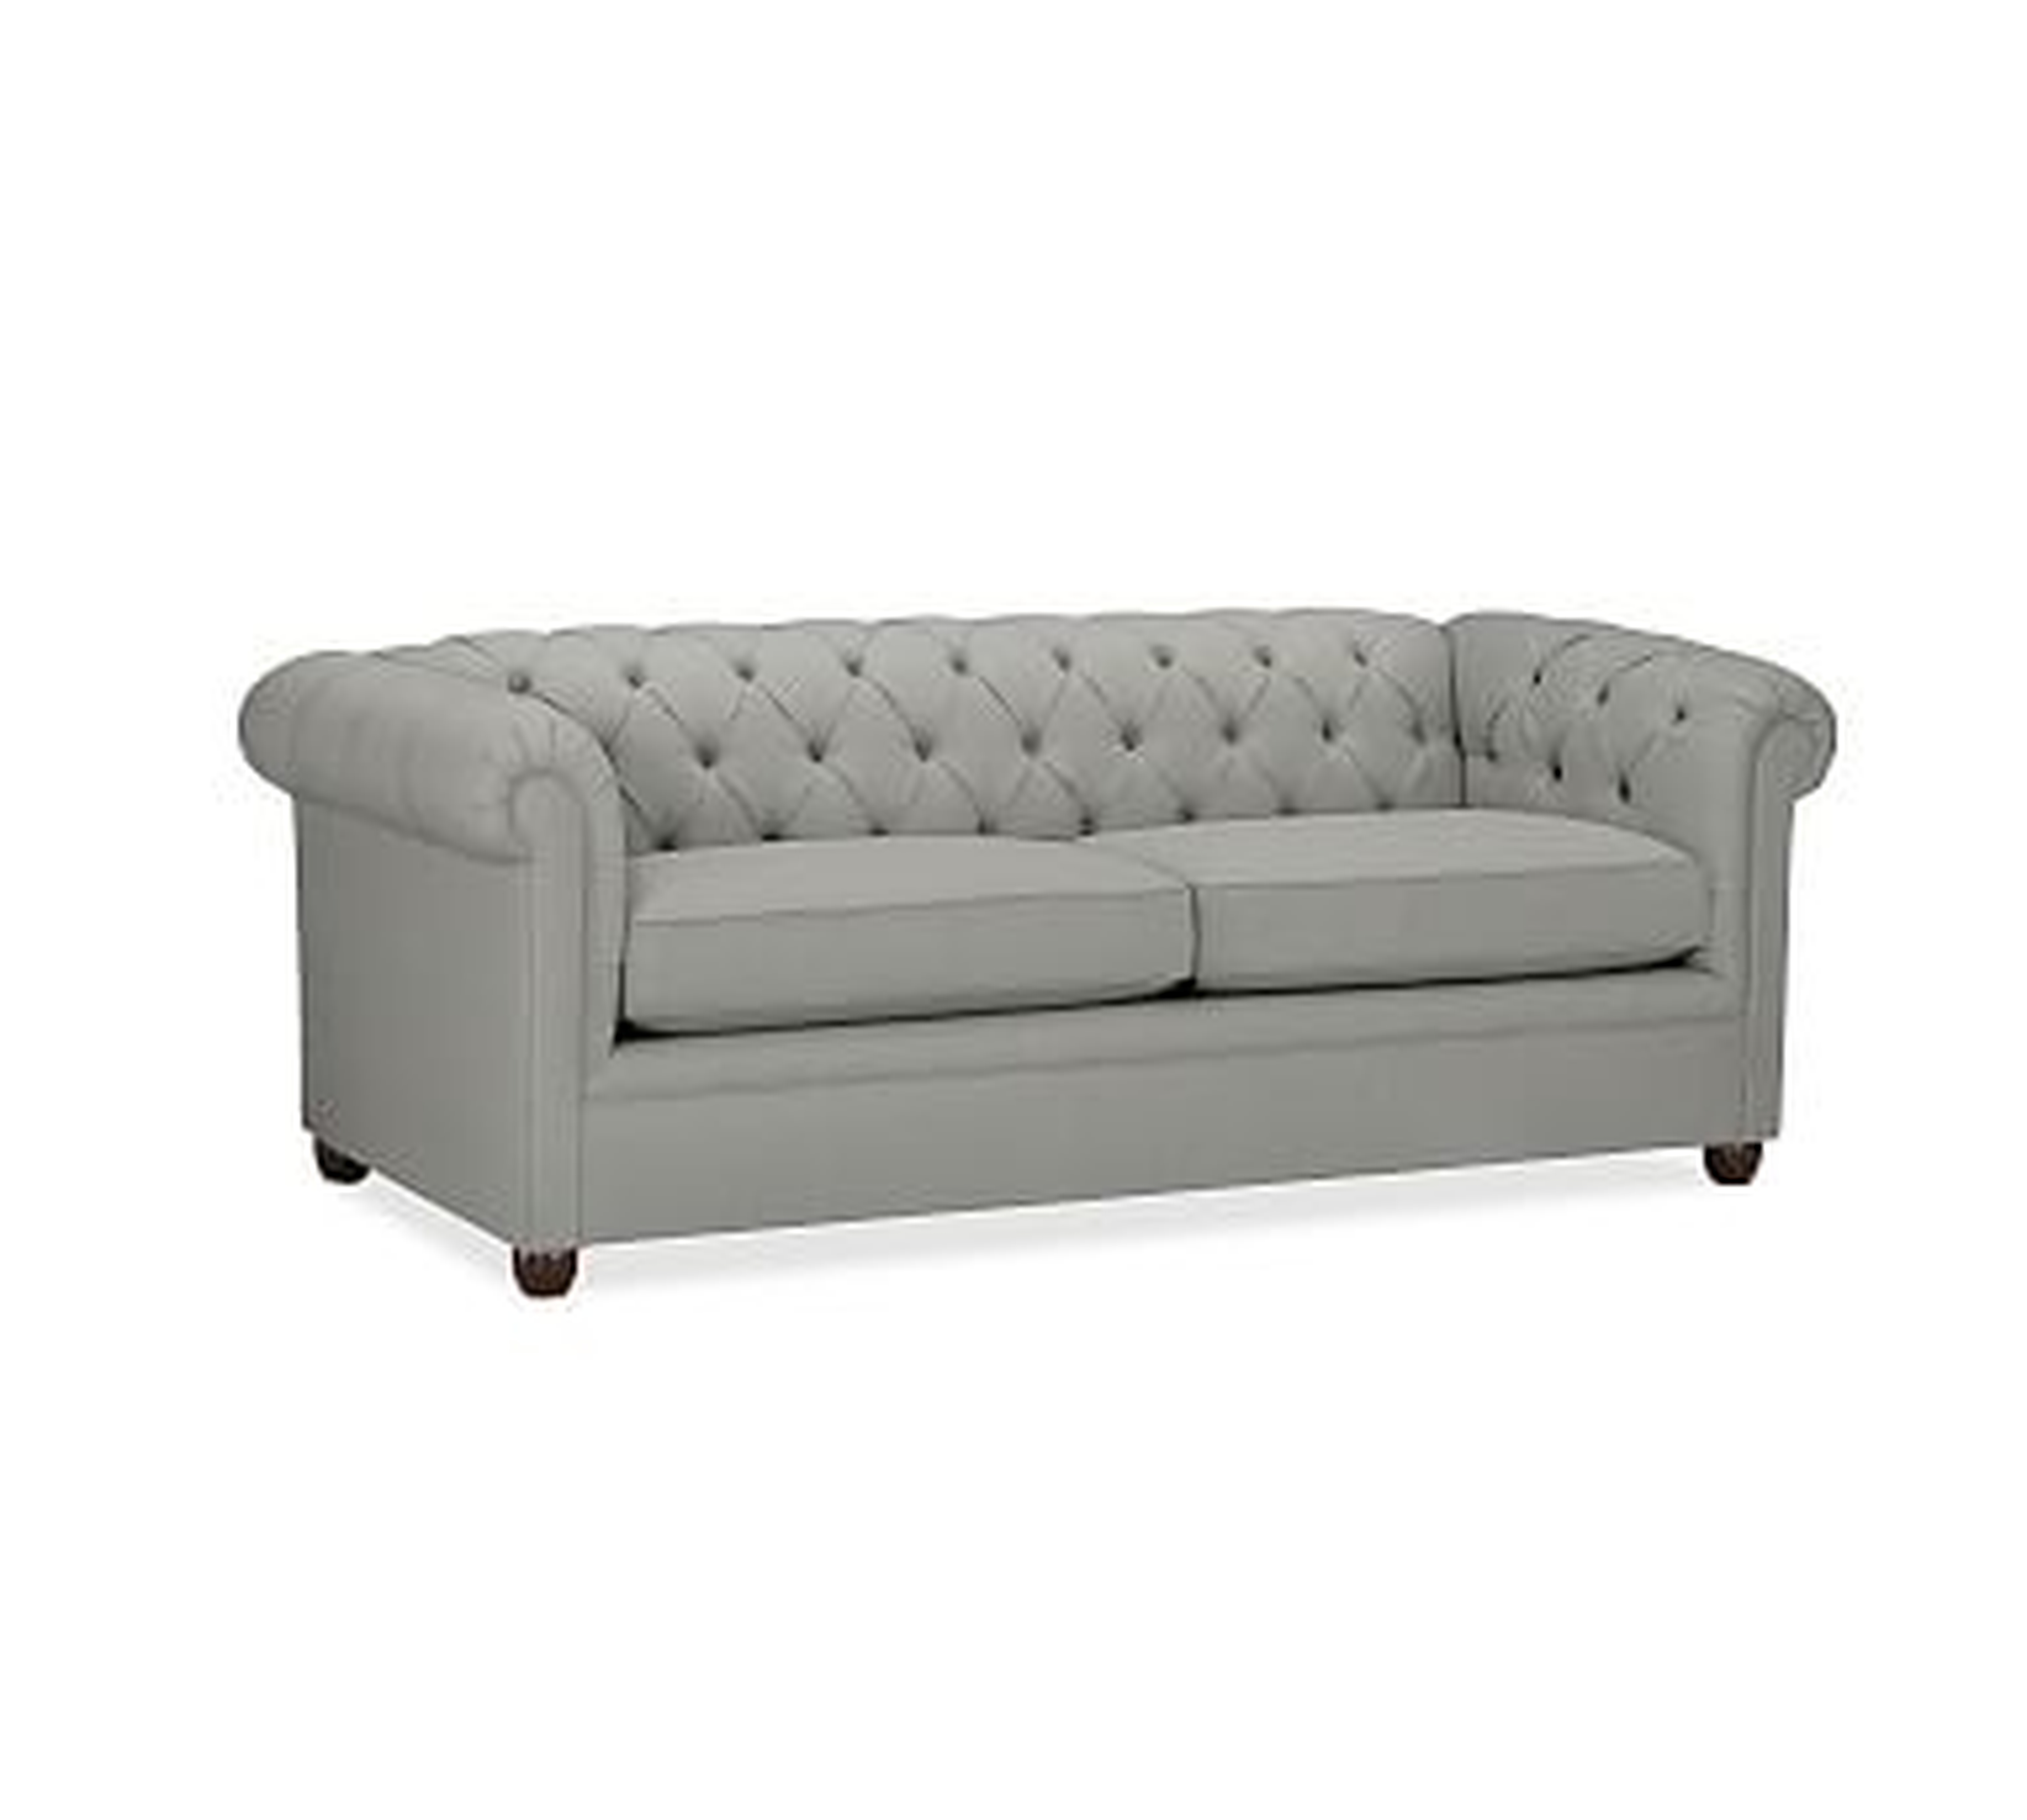 Chesterfield Upholstered Sofa 86", Polyester Wrapped Cushions, Performance Everydaysuede(TM) Metal Gray - Pottery Barn